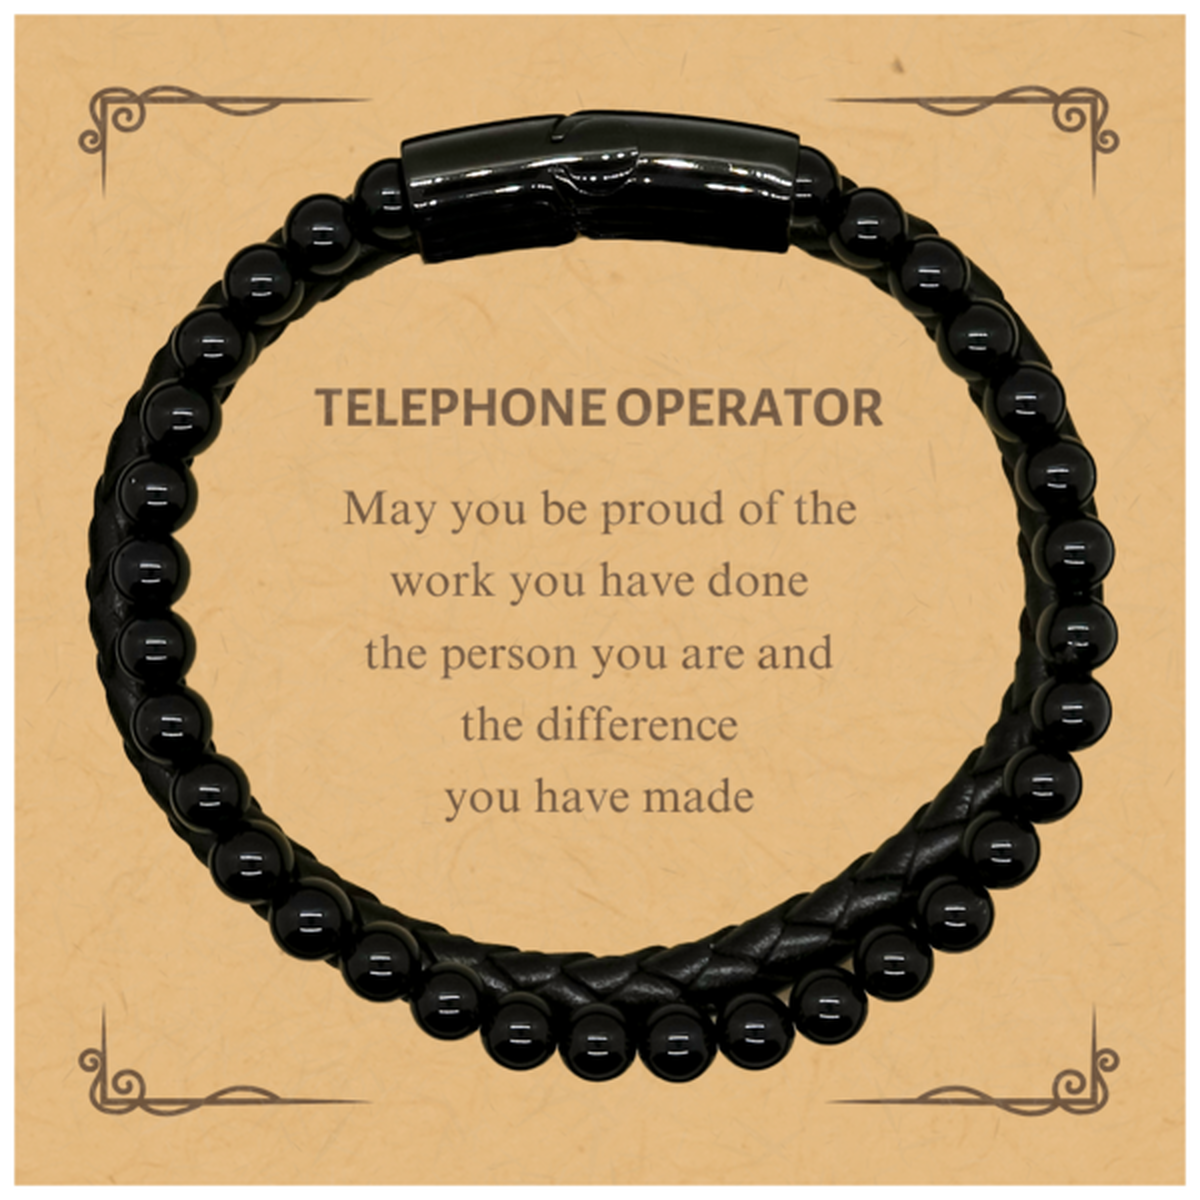 Telephone Operator May you be proud of the work you have done, Retirement Telephone Operator Stone Leather Bracelets for Colleague Appreciation Gifts Amazing for Telephone Operator